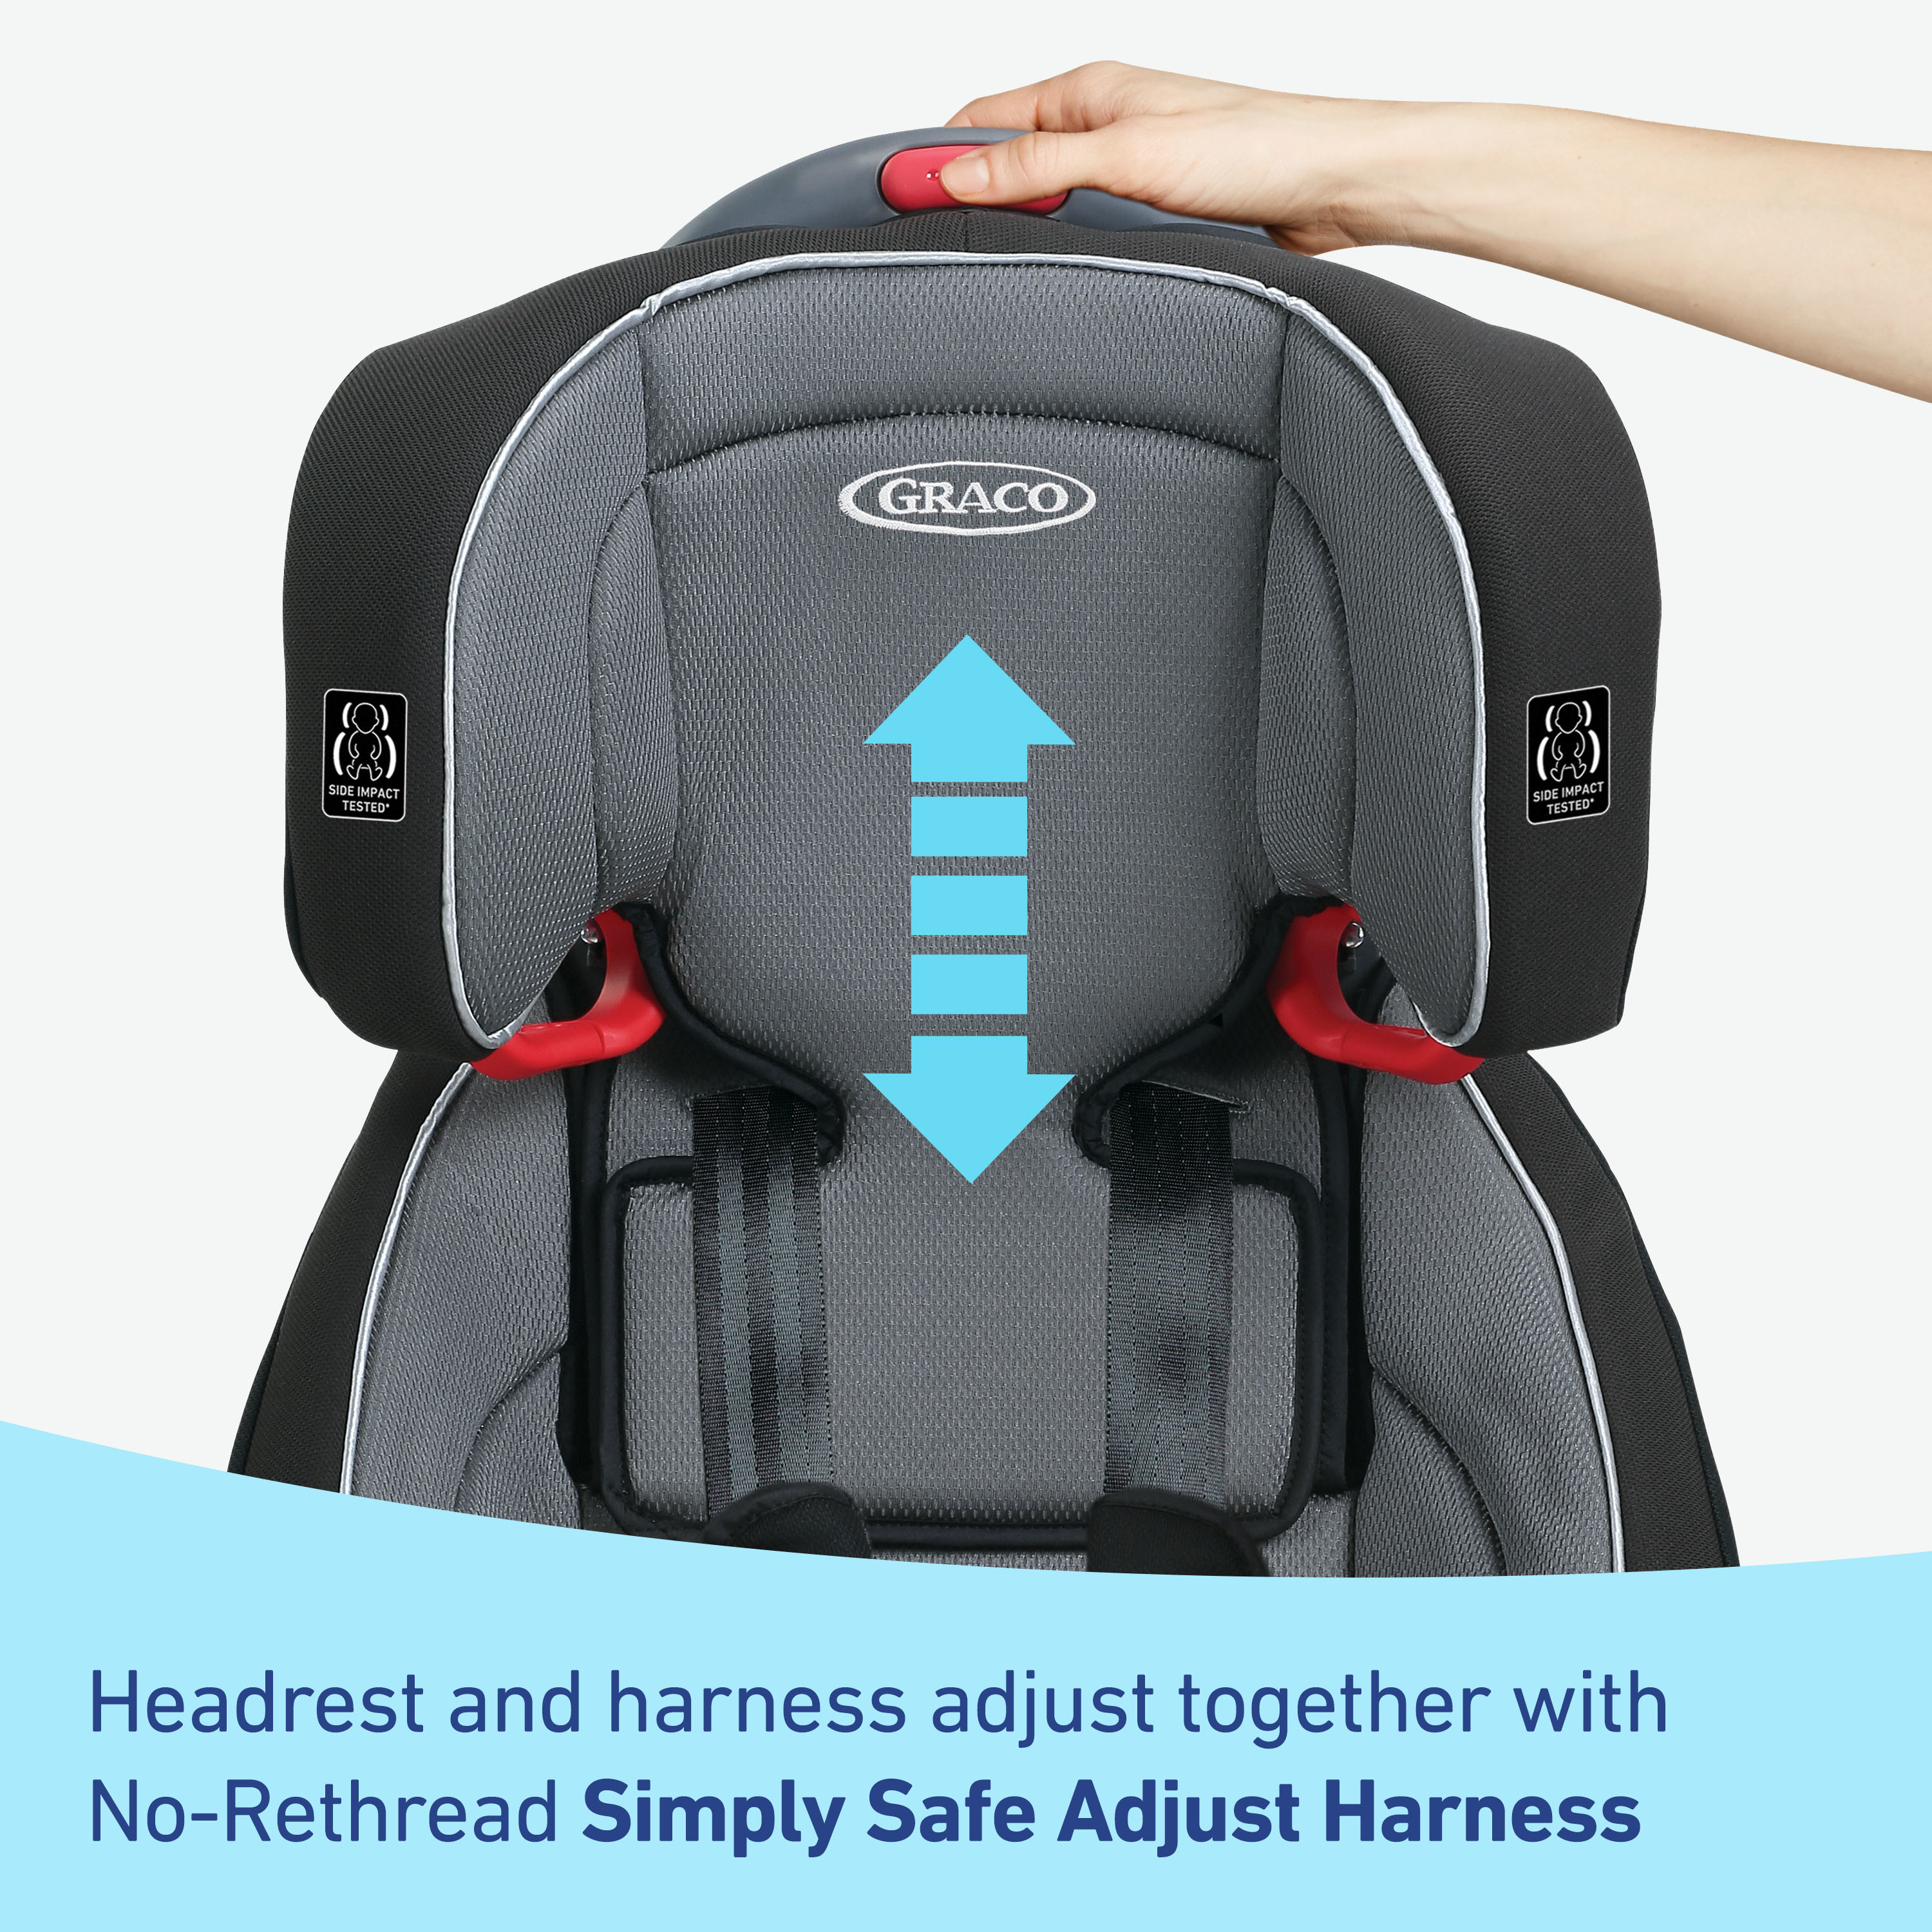 Graco Nautilus 65 3-in-1 Harness Booster Car Seat, Bravo - image 4 of 7